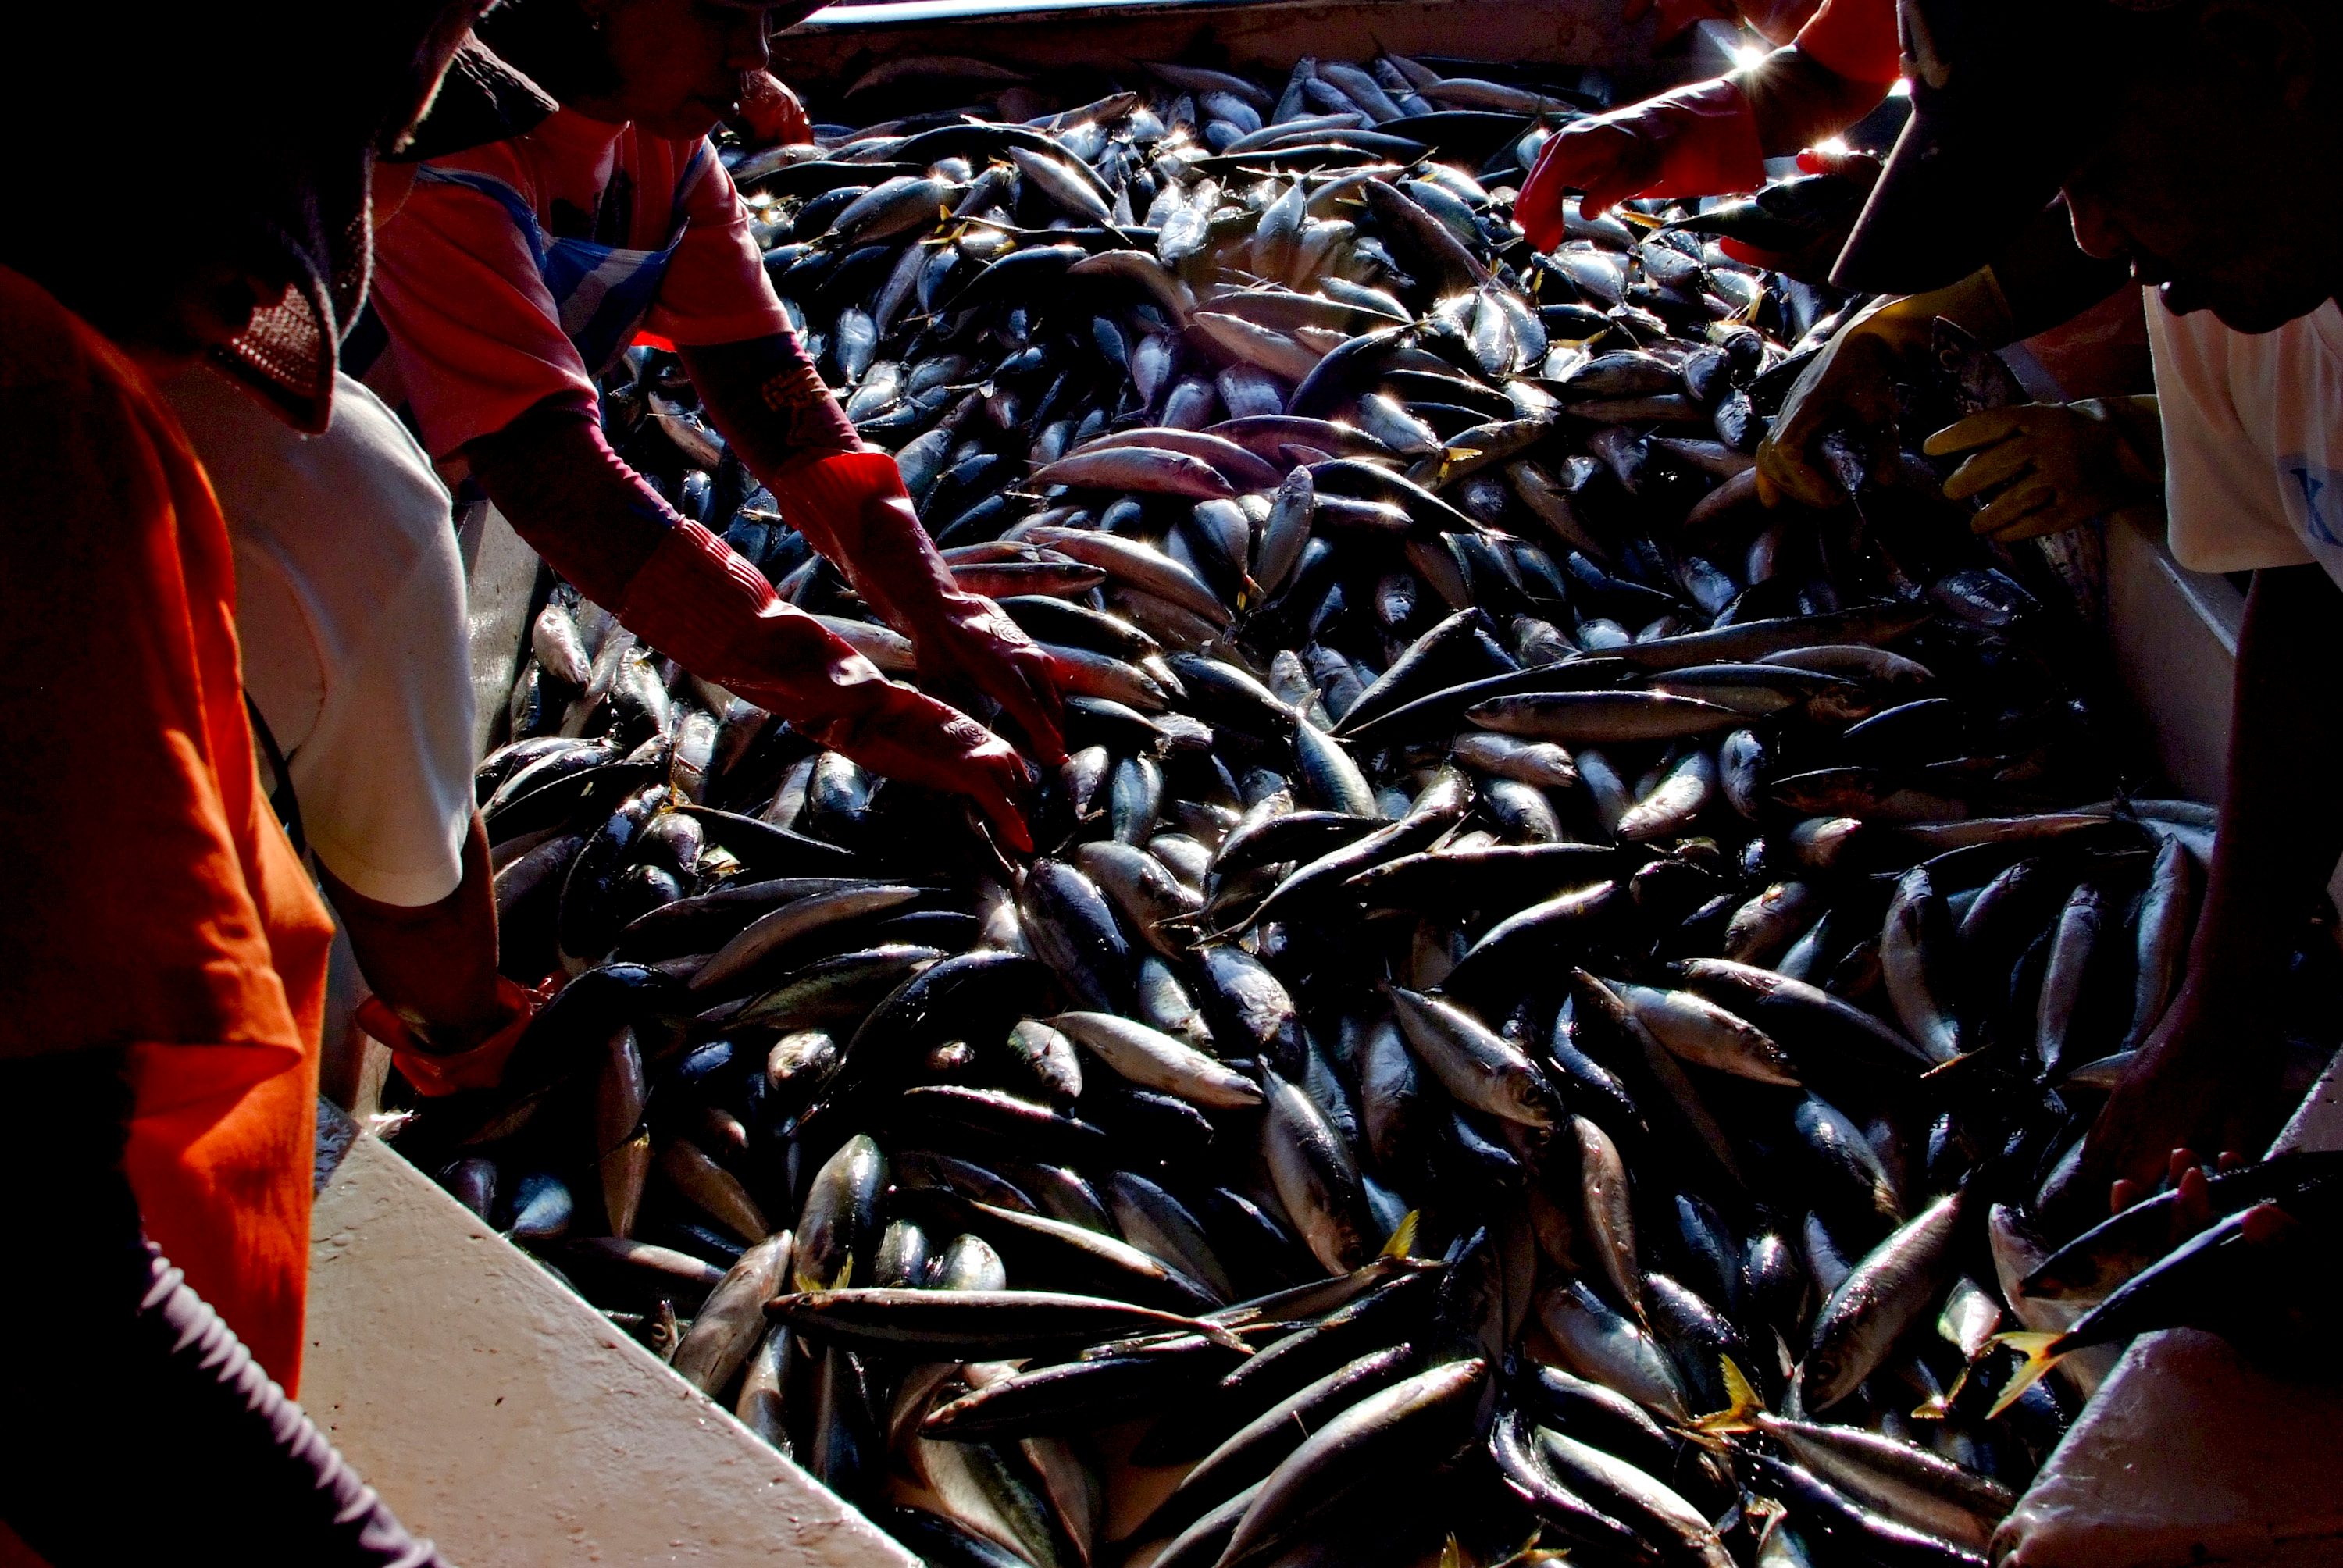 Early morning activity in the world renowned fish port of General Santos city in Mindanao, which boasts of their wide array of fish catch but especially the Yellow-fin tuna that garnered the attention of the region's biggest producers of fish products due to its quality. Photo by Veejay Villafranca/Greenpeace 